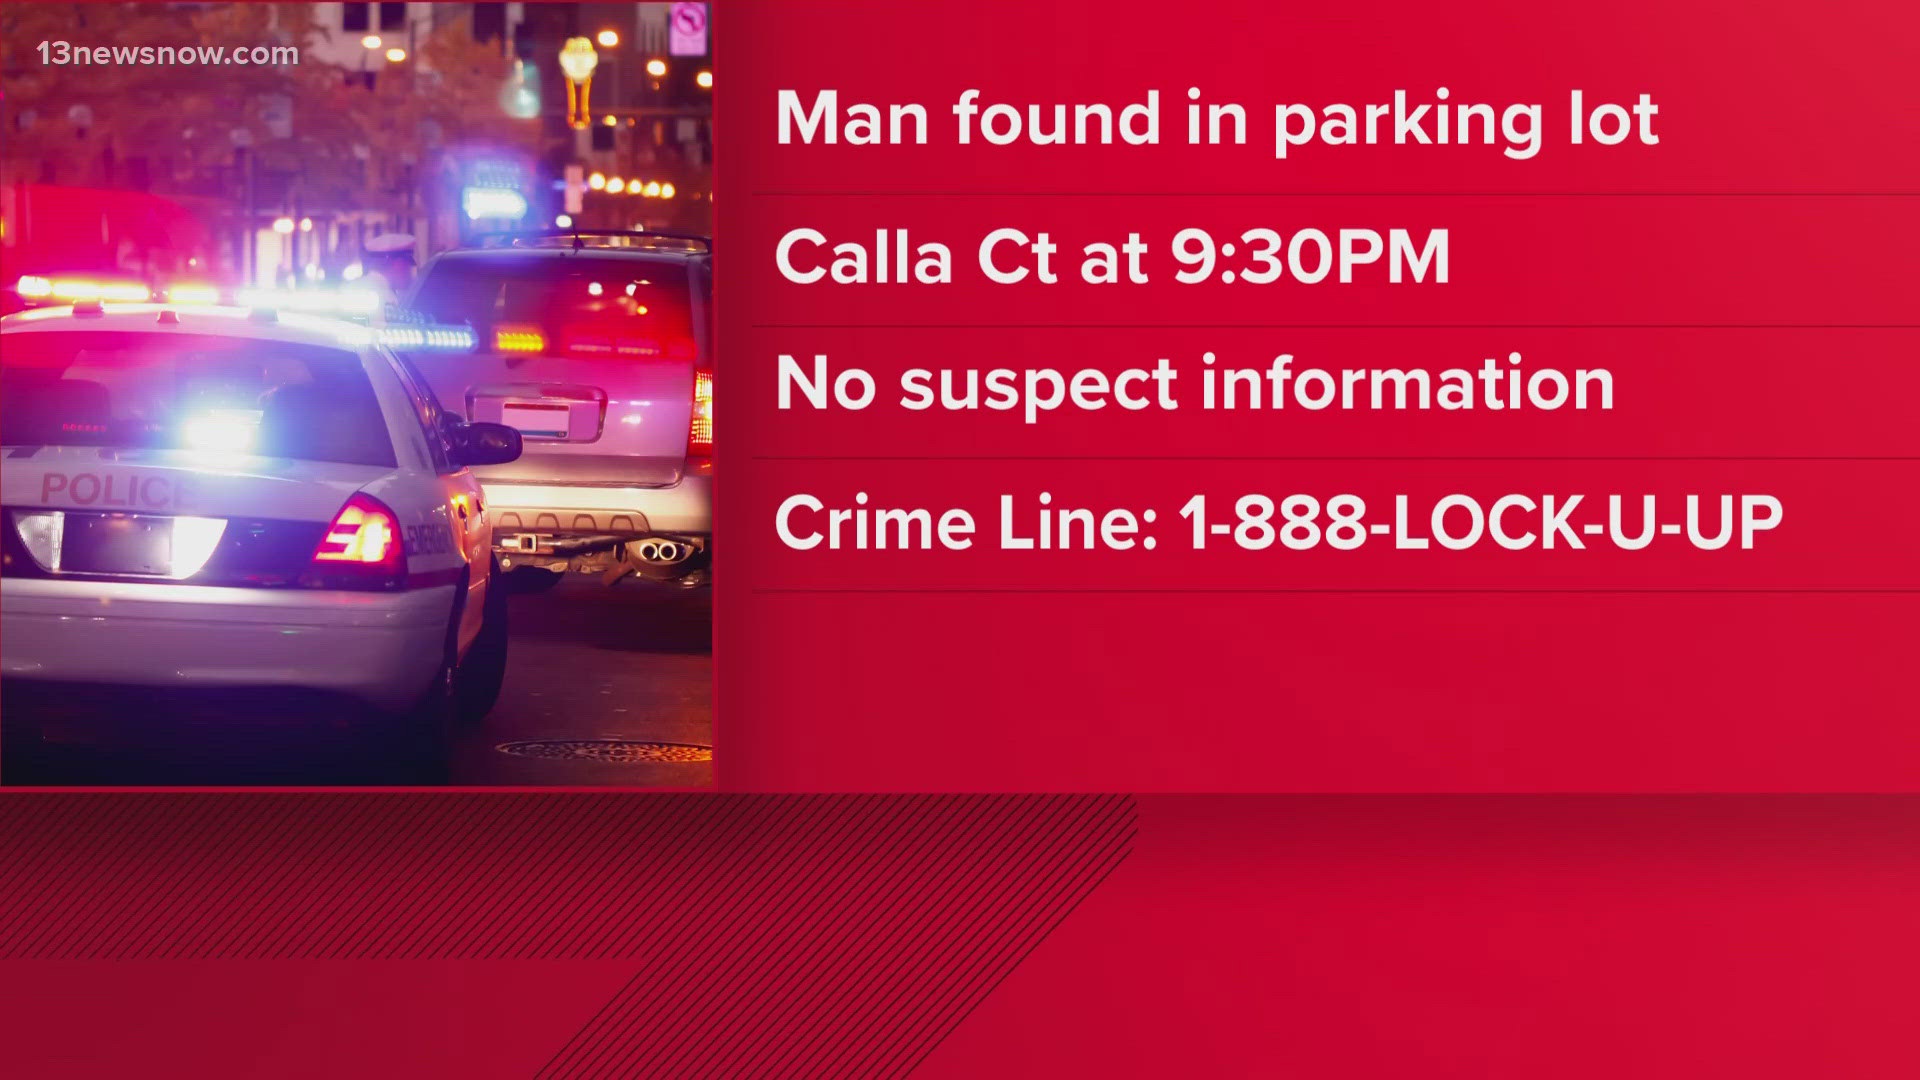 Police officers found him in a parking lot on Calla Court just after 9:30 tonight.